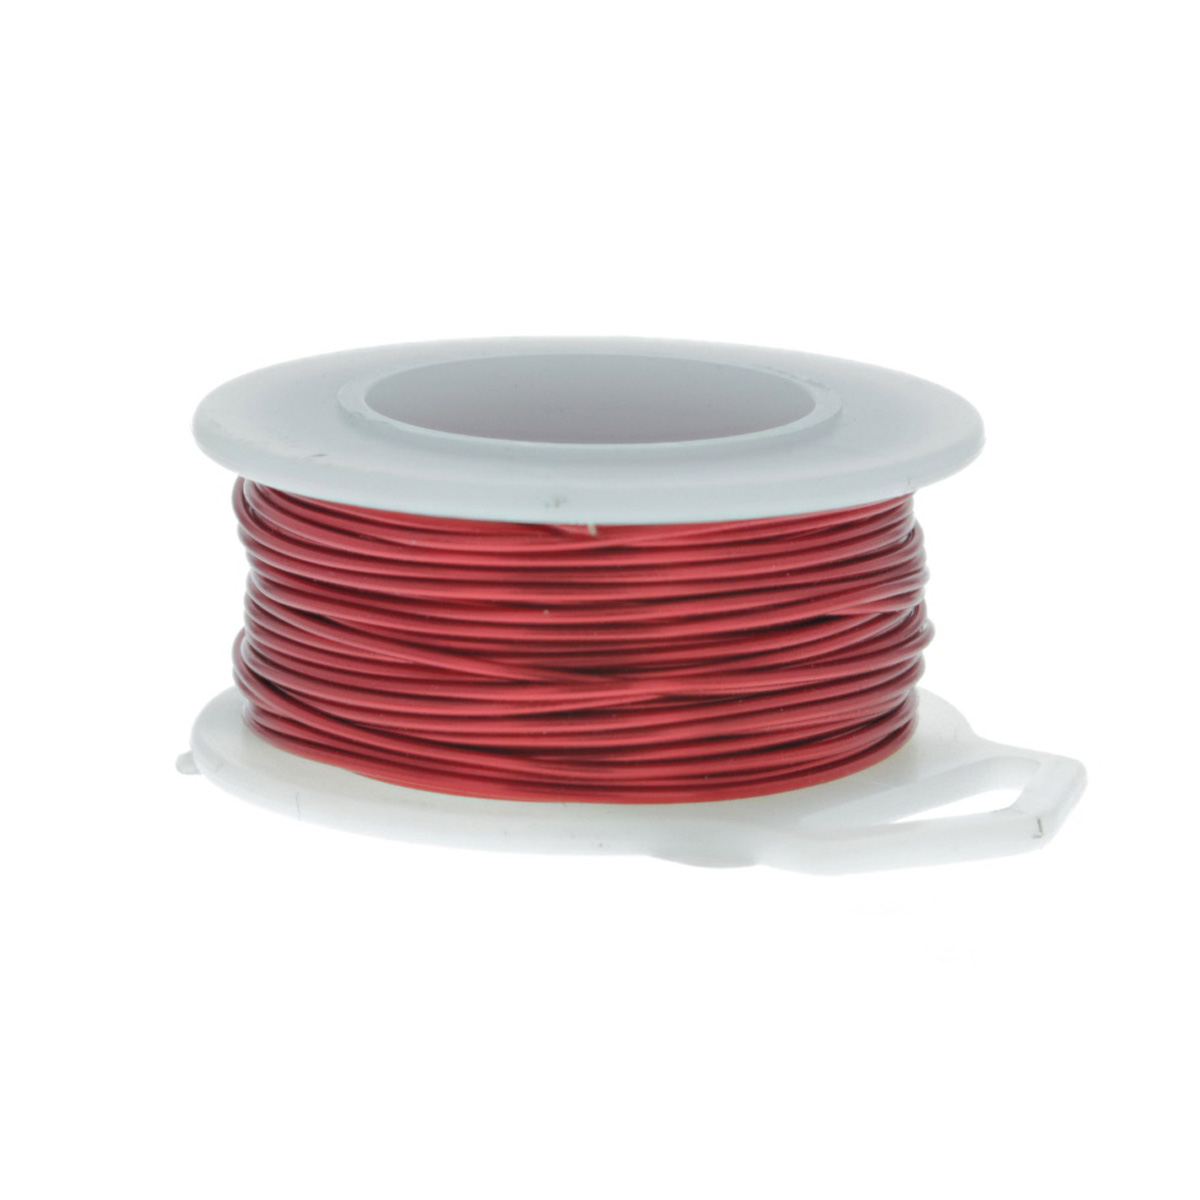 24 Gauge Round Red Enameled Craft Wire - 60 ft: Wire Jewelry